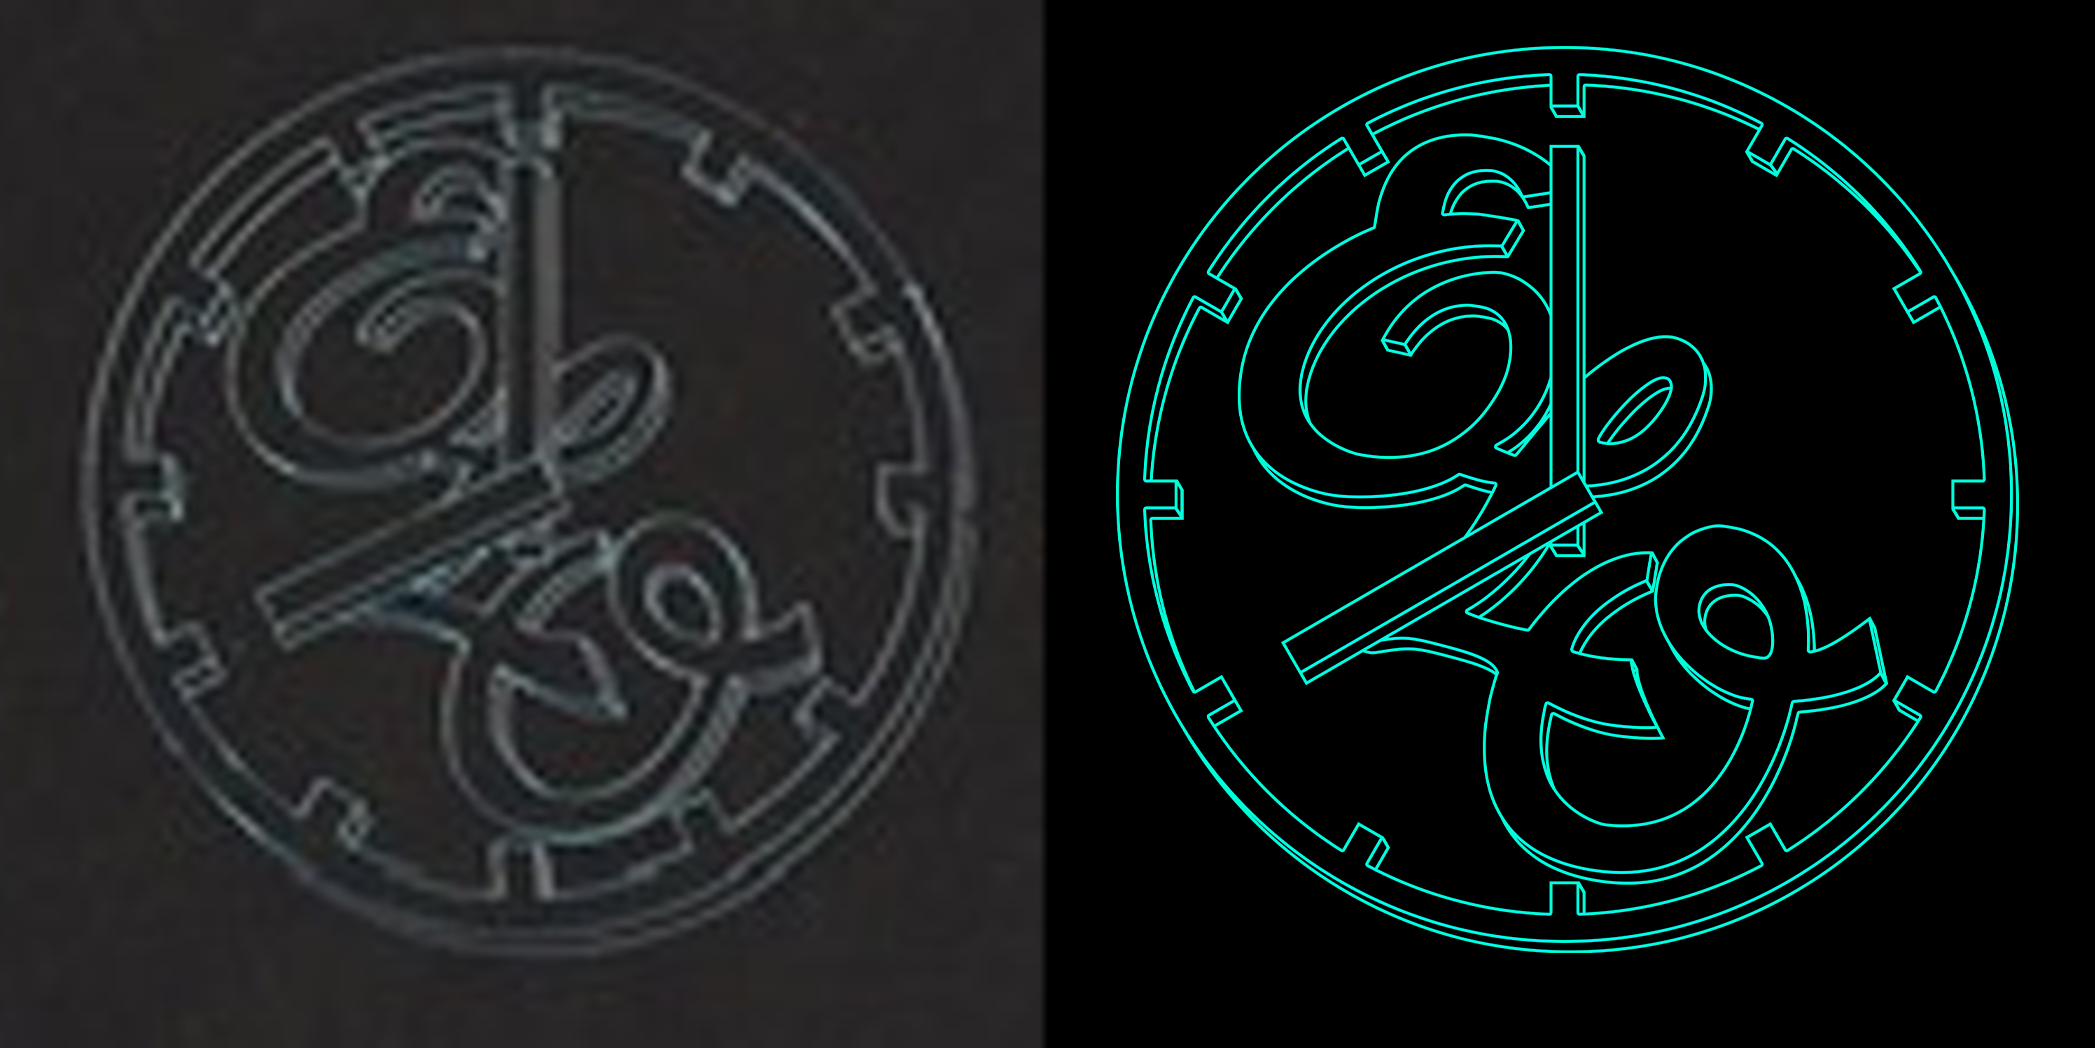 Electric Light Orchestra - Small logo excerpted from the Time Tour program booklet (1981-1982)